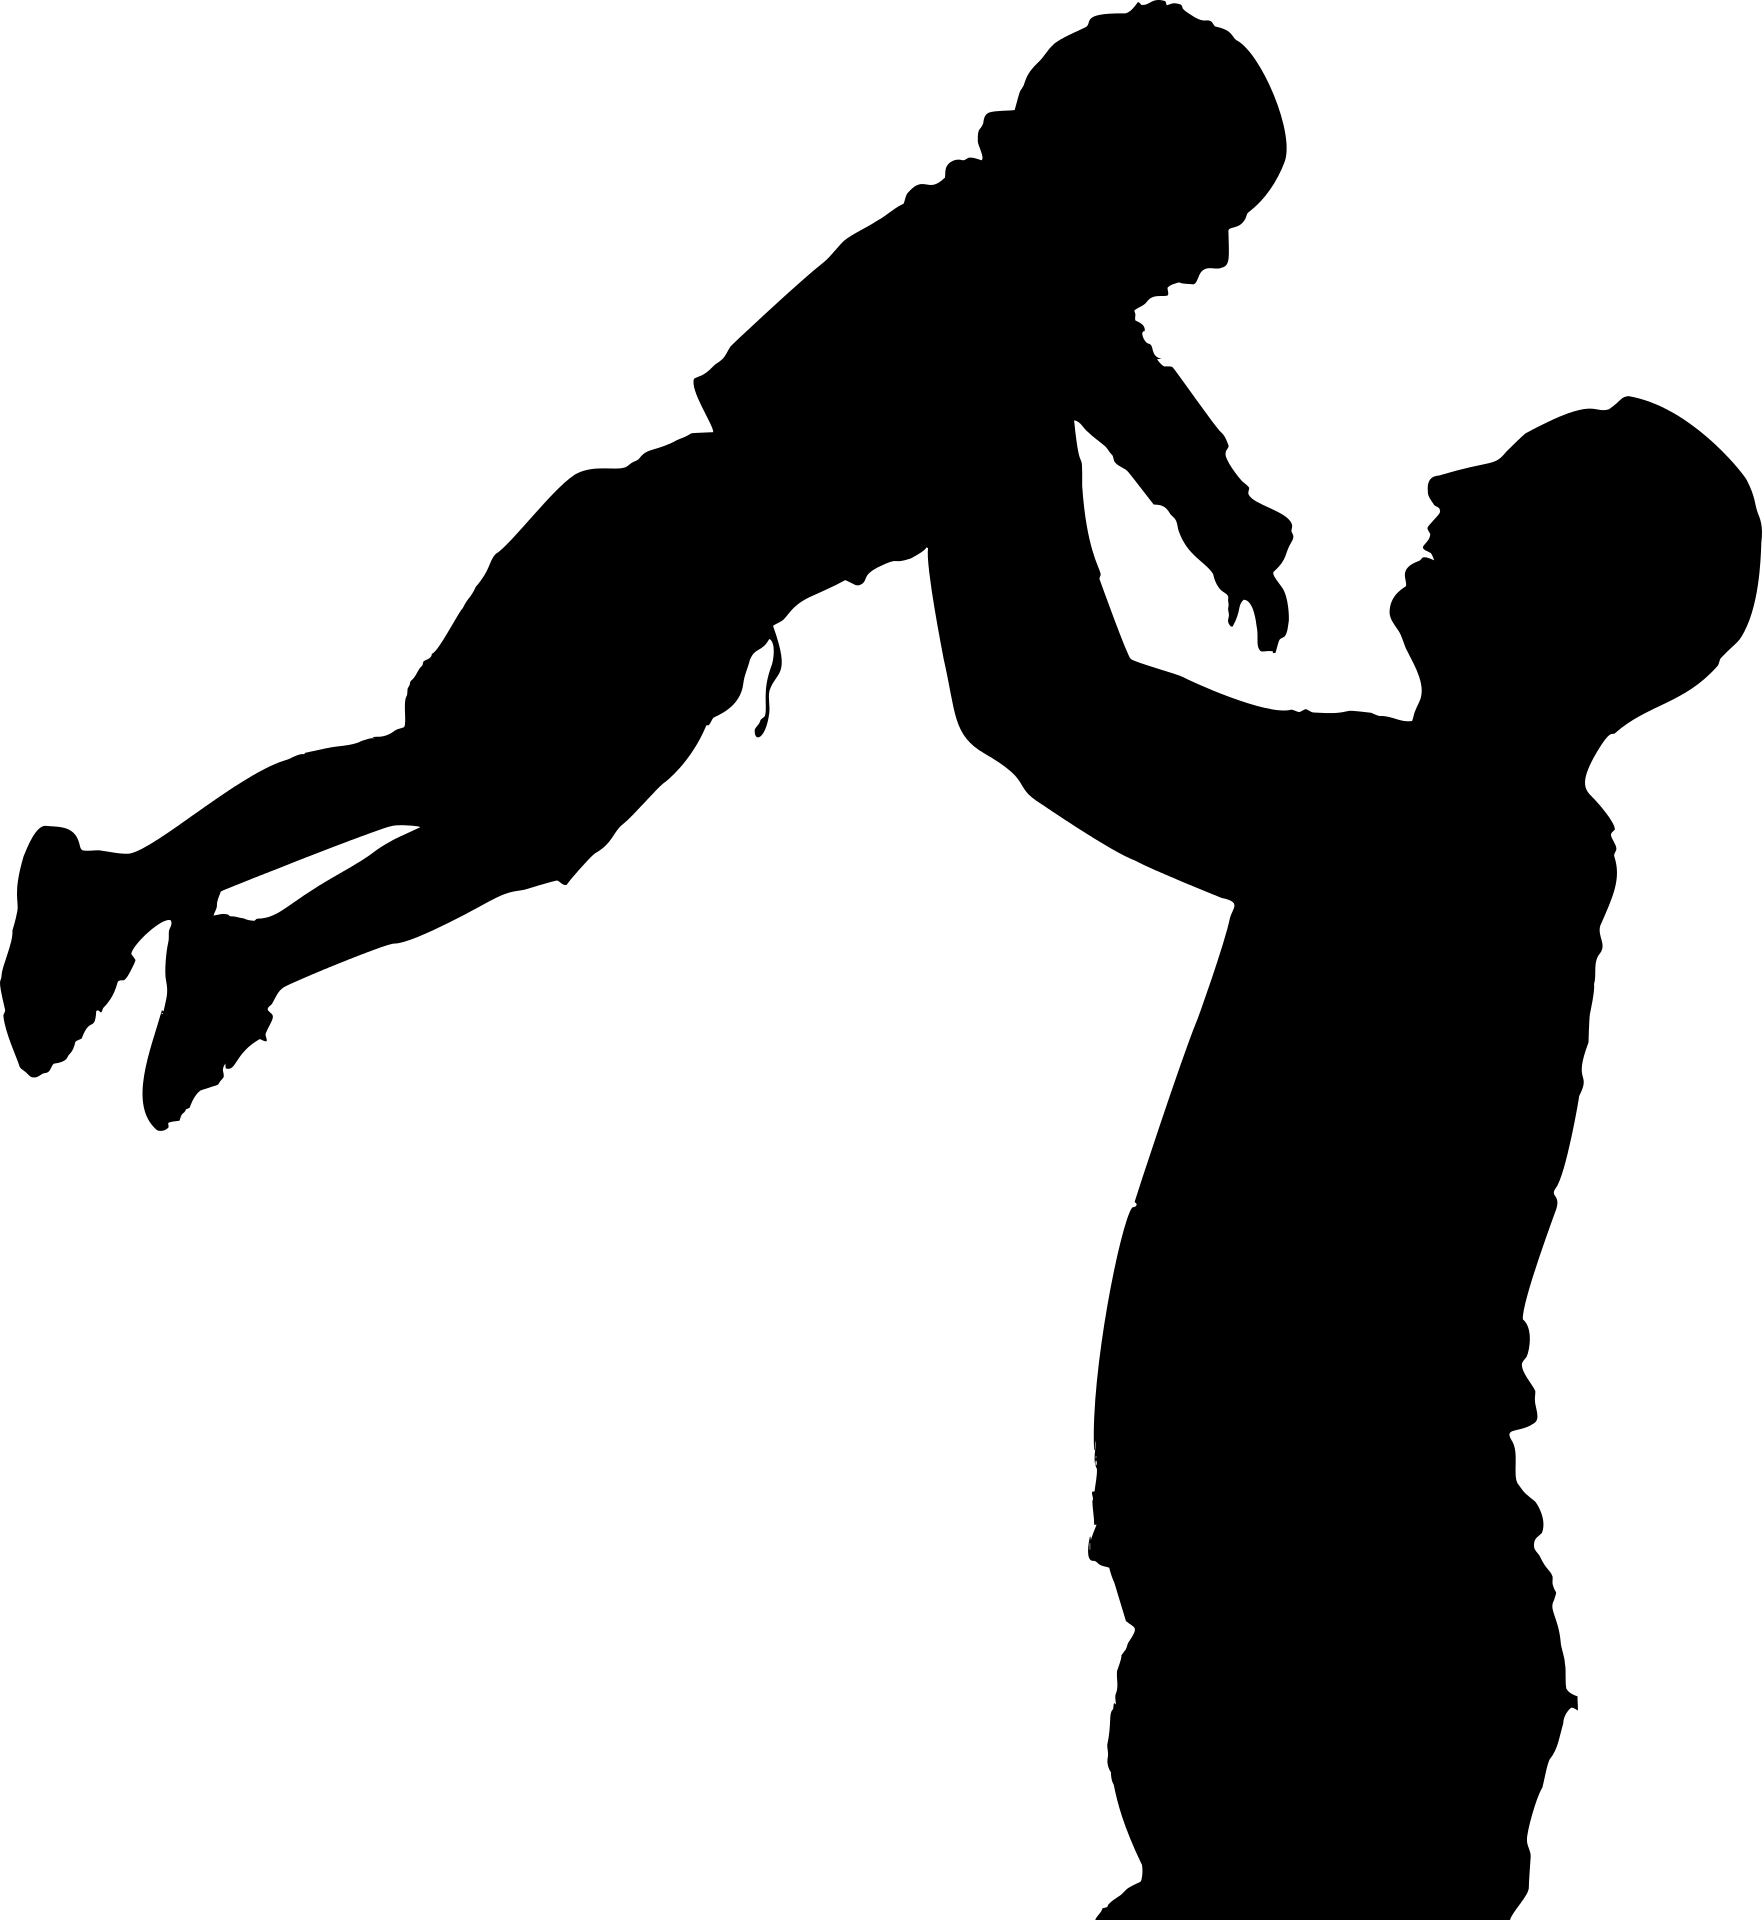 father visitation with son after divorce